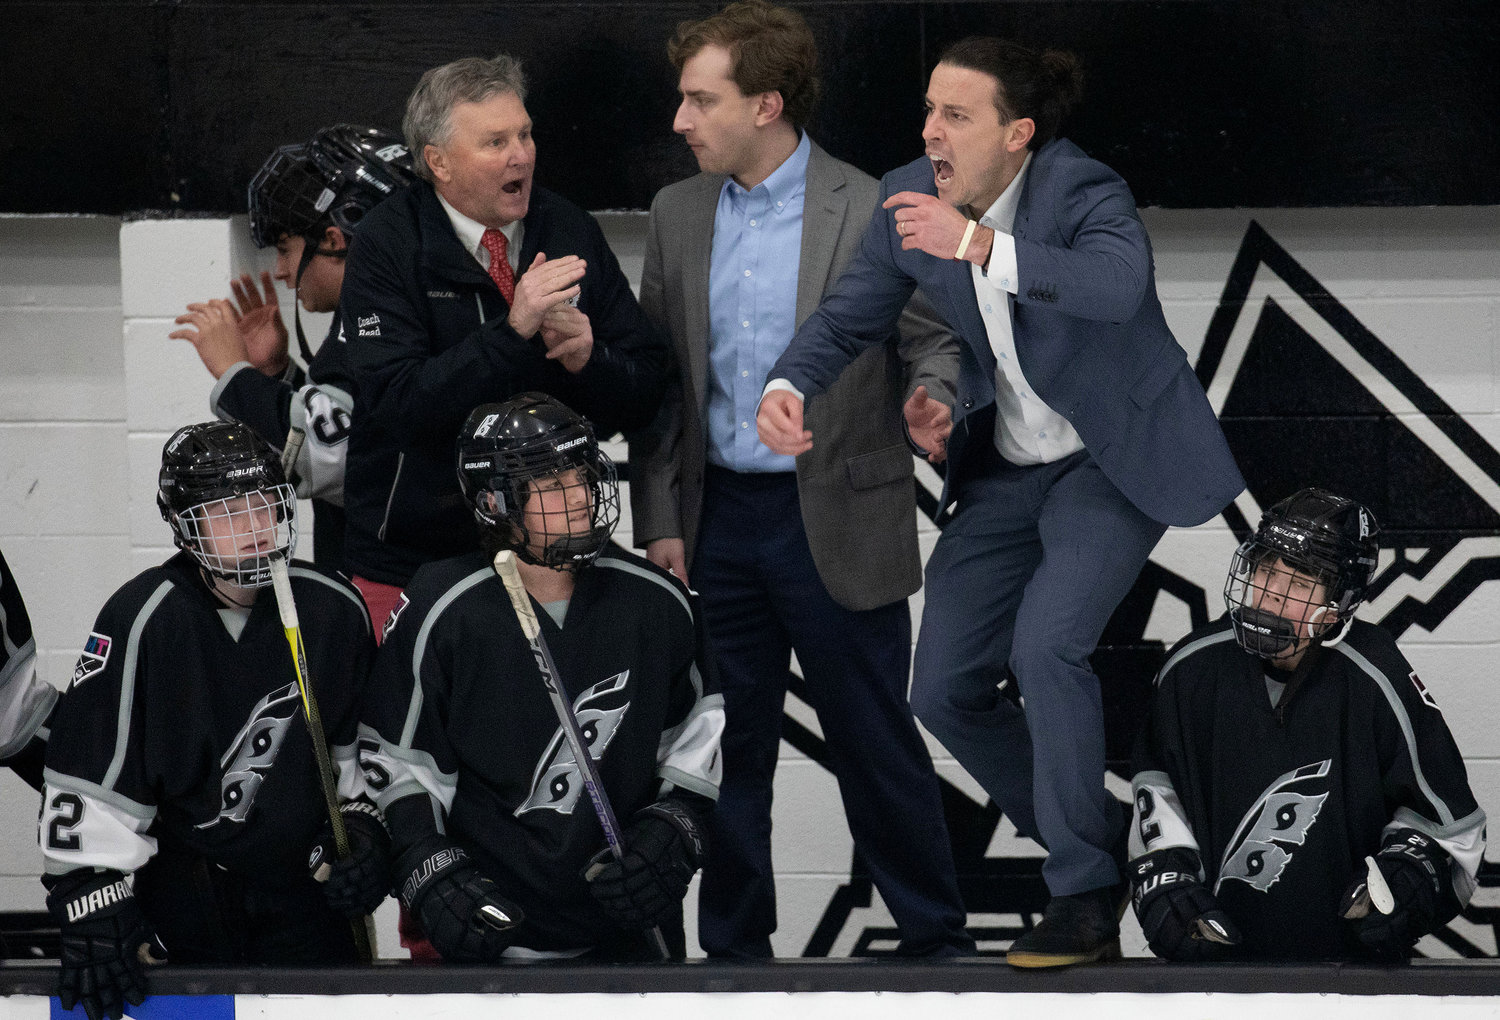 Hurricanes head coach Johnny Sheil (right) and his coaches bark out orders with under 2 minutes to play in the game and RMT holding a brief 2-1 lead.